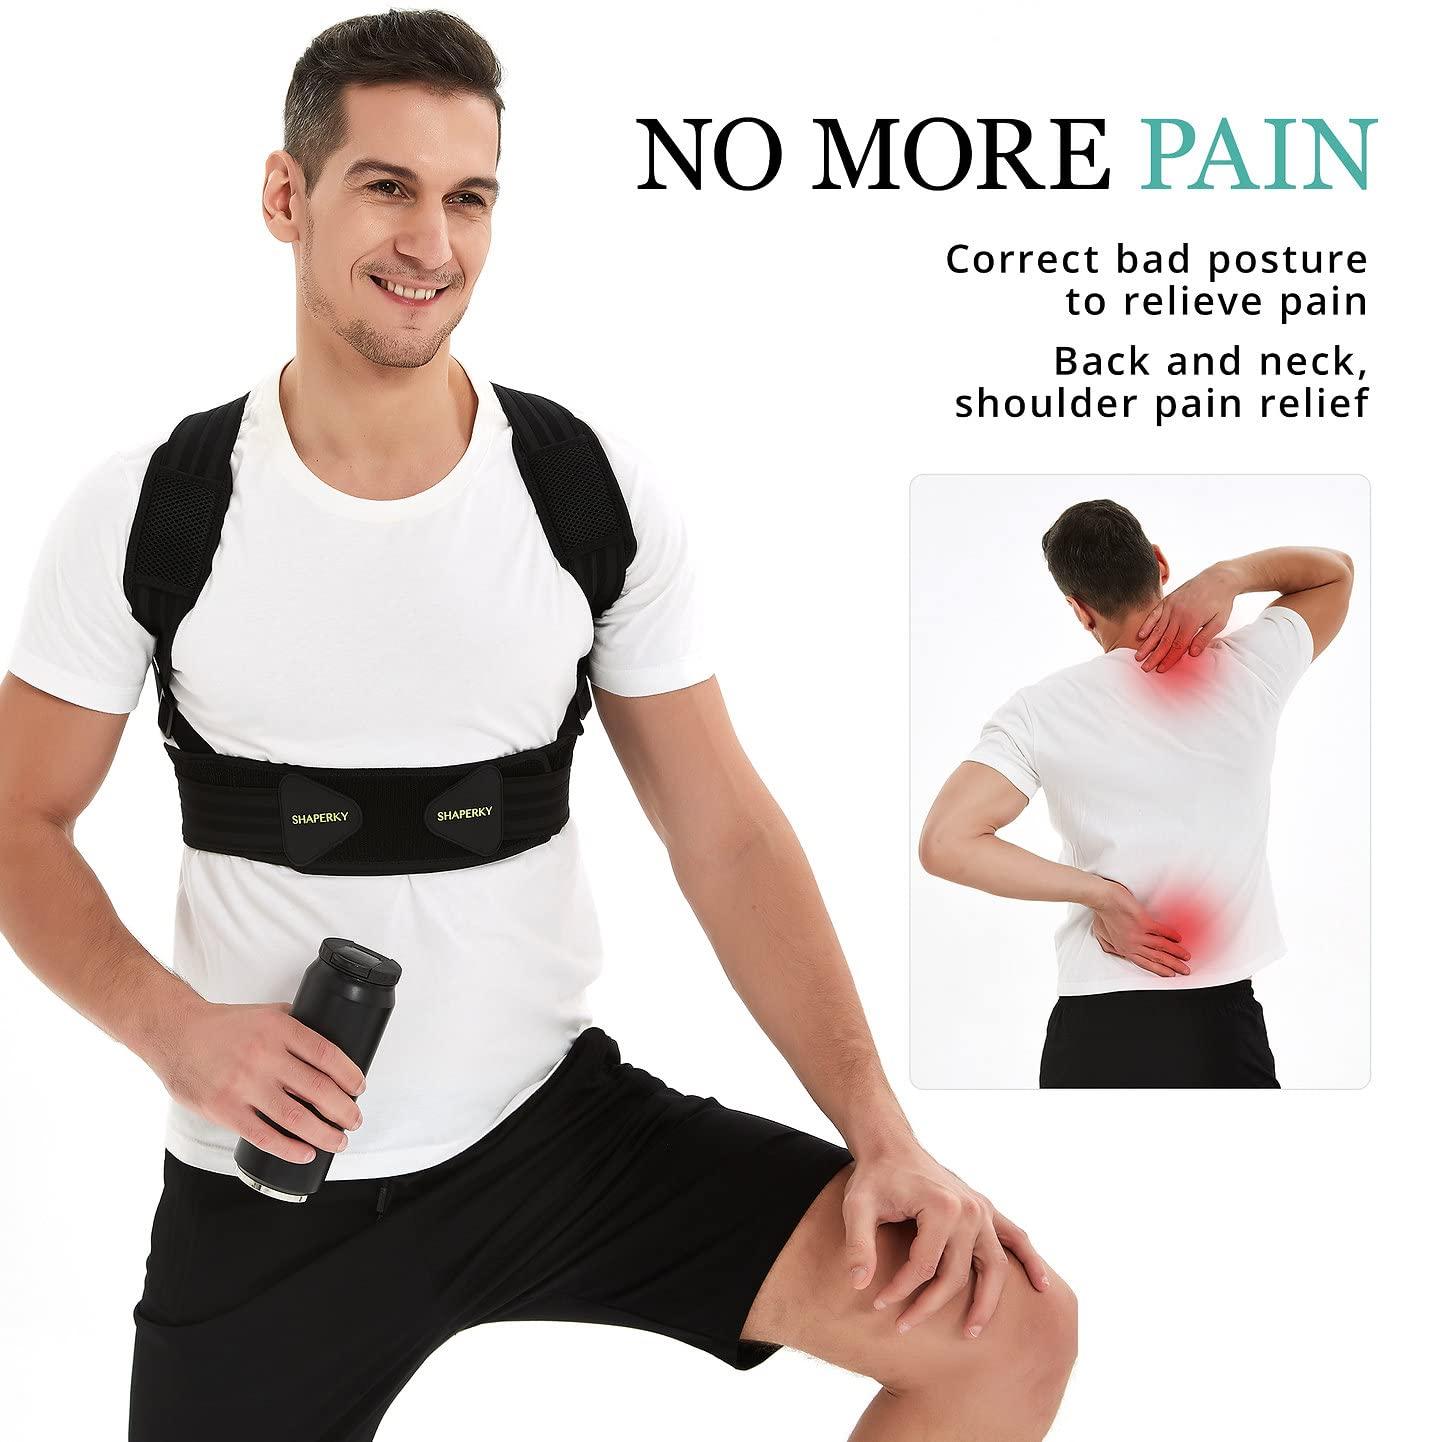 SHAPERKY Posture Corrector for Men and Women, Adjustable Upper Back Brace,  Muscle Memory Support Straightener, Providing Pain Relief from Neck,  Shoulder, and Upper and Lower Back, L/XL Large/X-Large